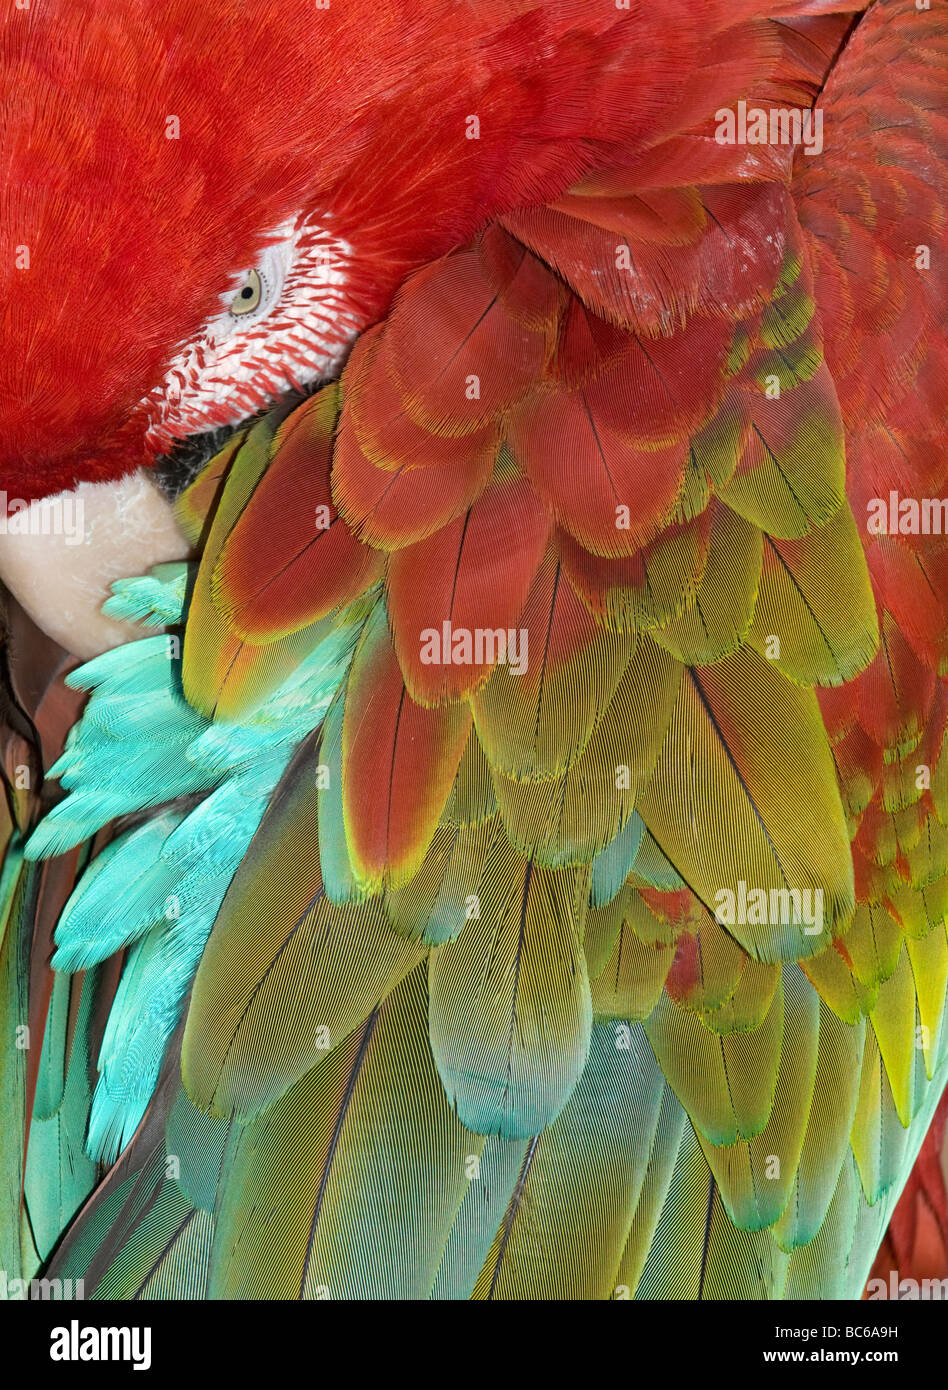 Red and Green Macaw (Ara chloroptera) Sleeping, detail of feathers Stock Photo